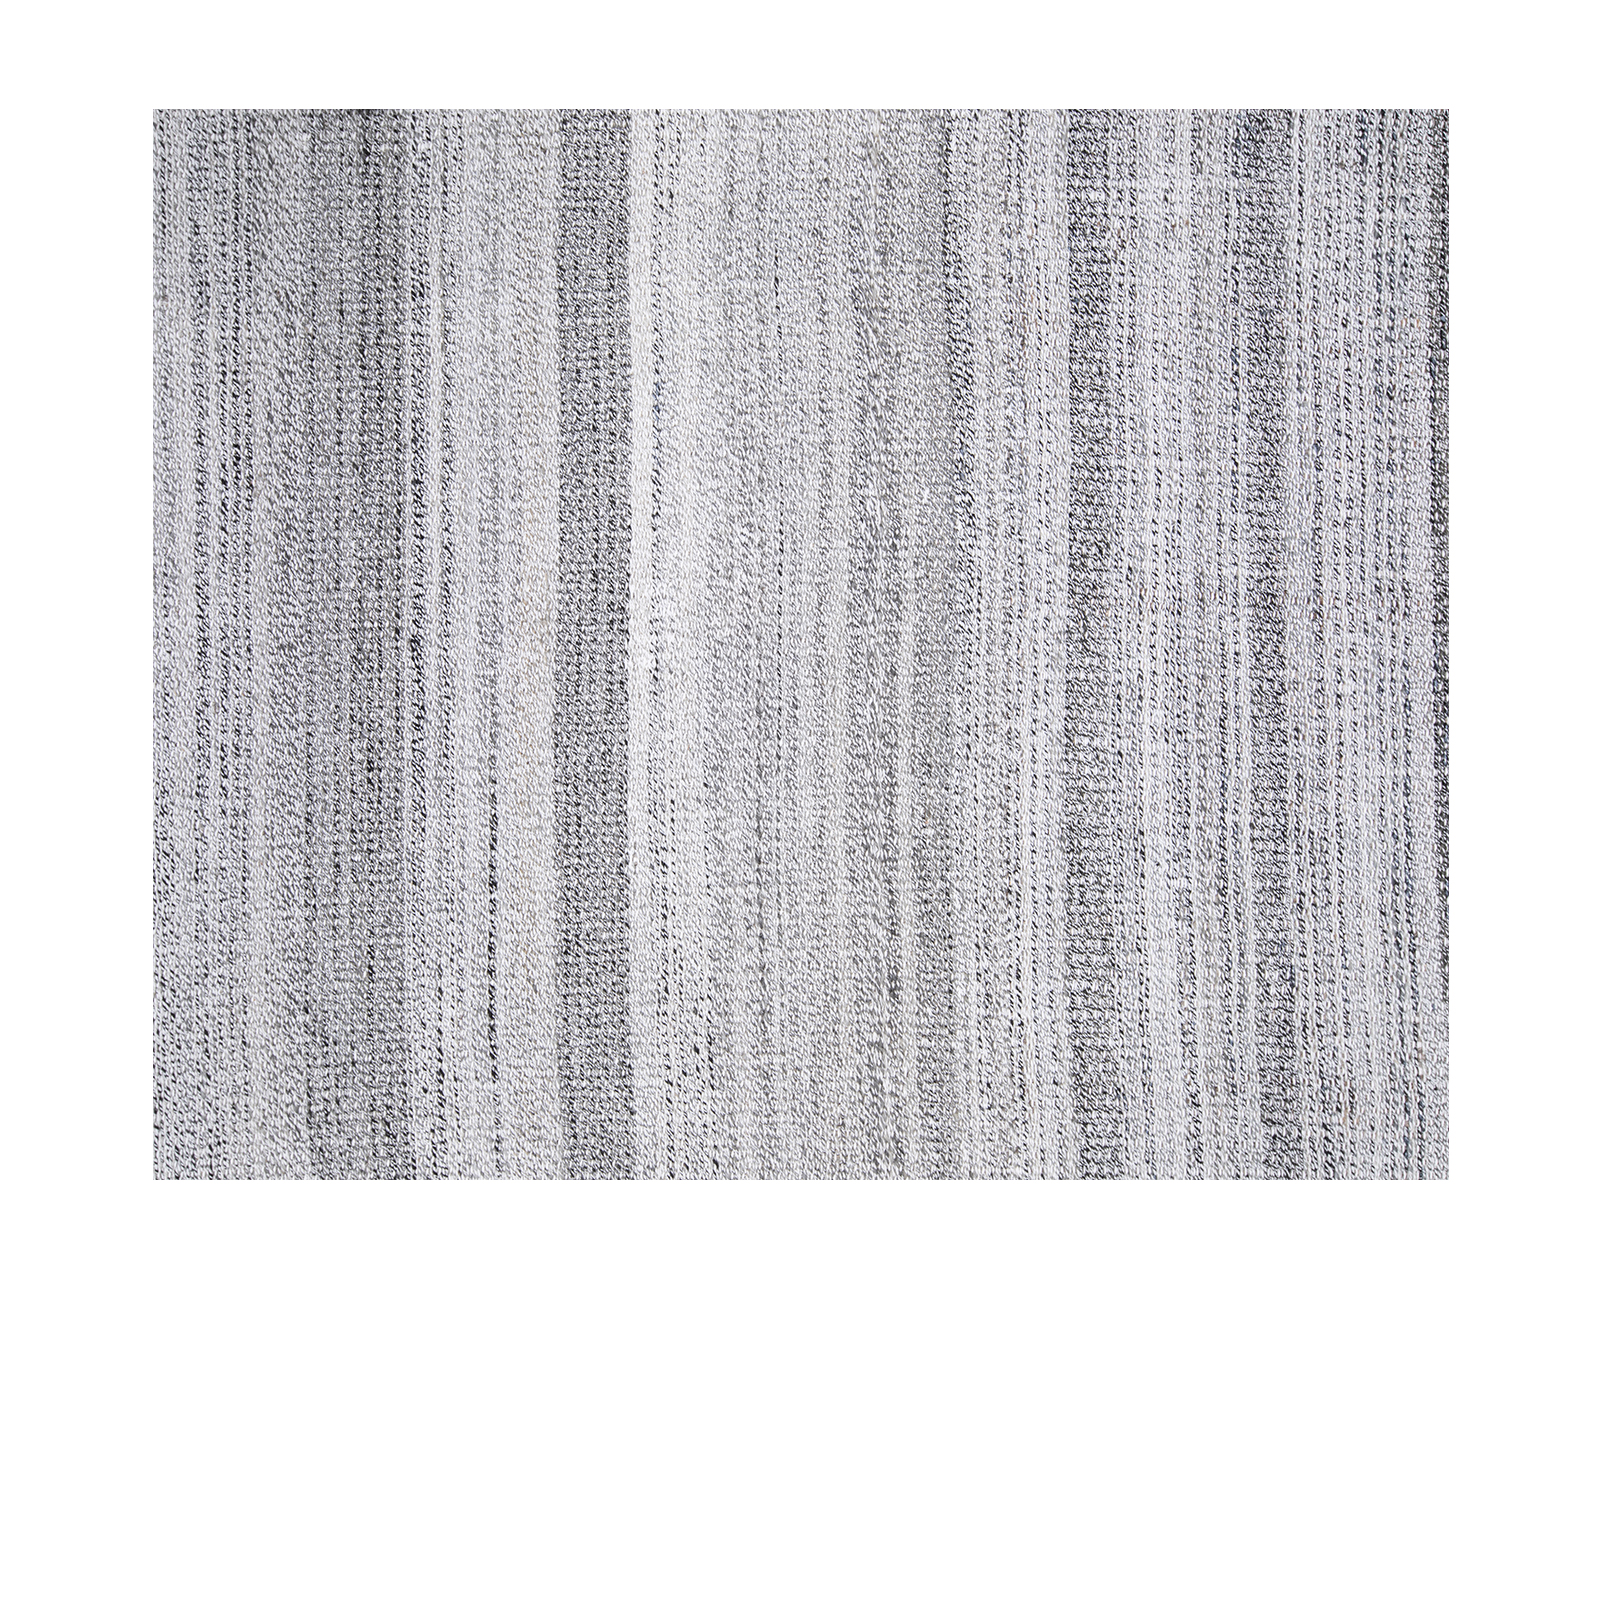 This Pelas Cahrmo  flatweave rug is made with handspun wool and Cotton and natural dyes. 